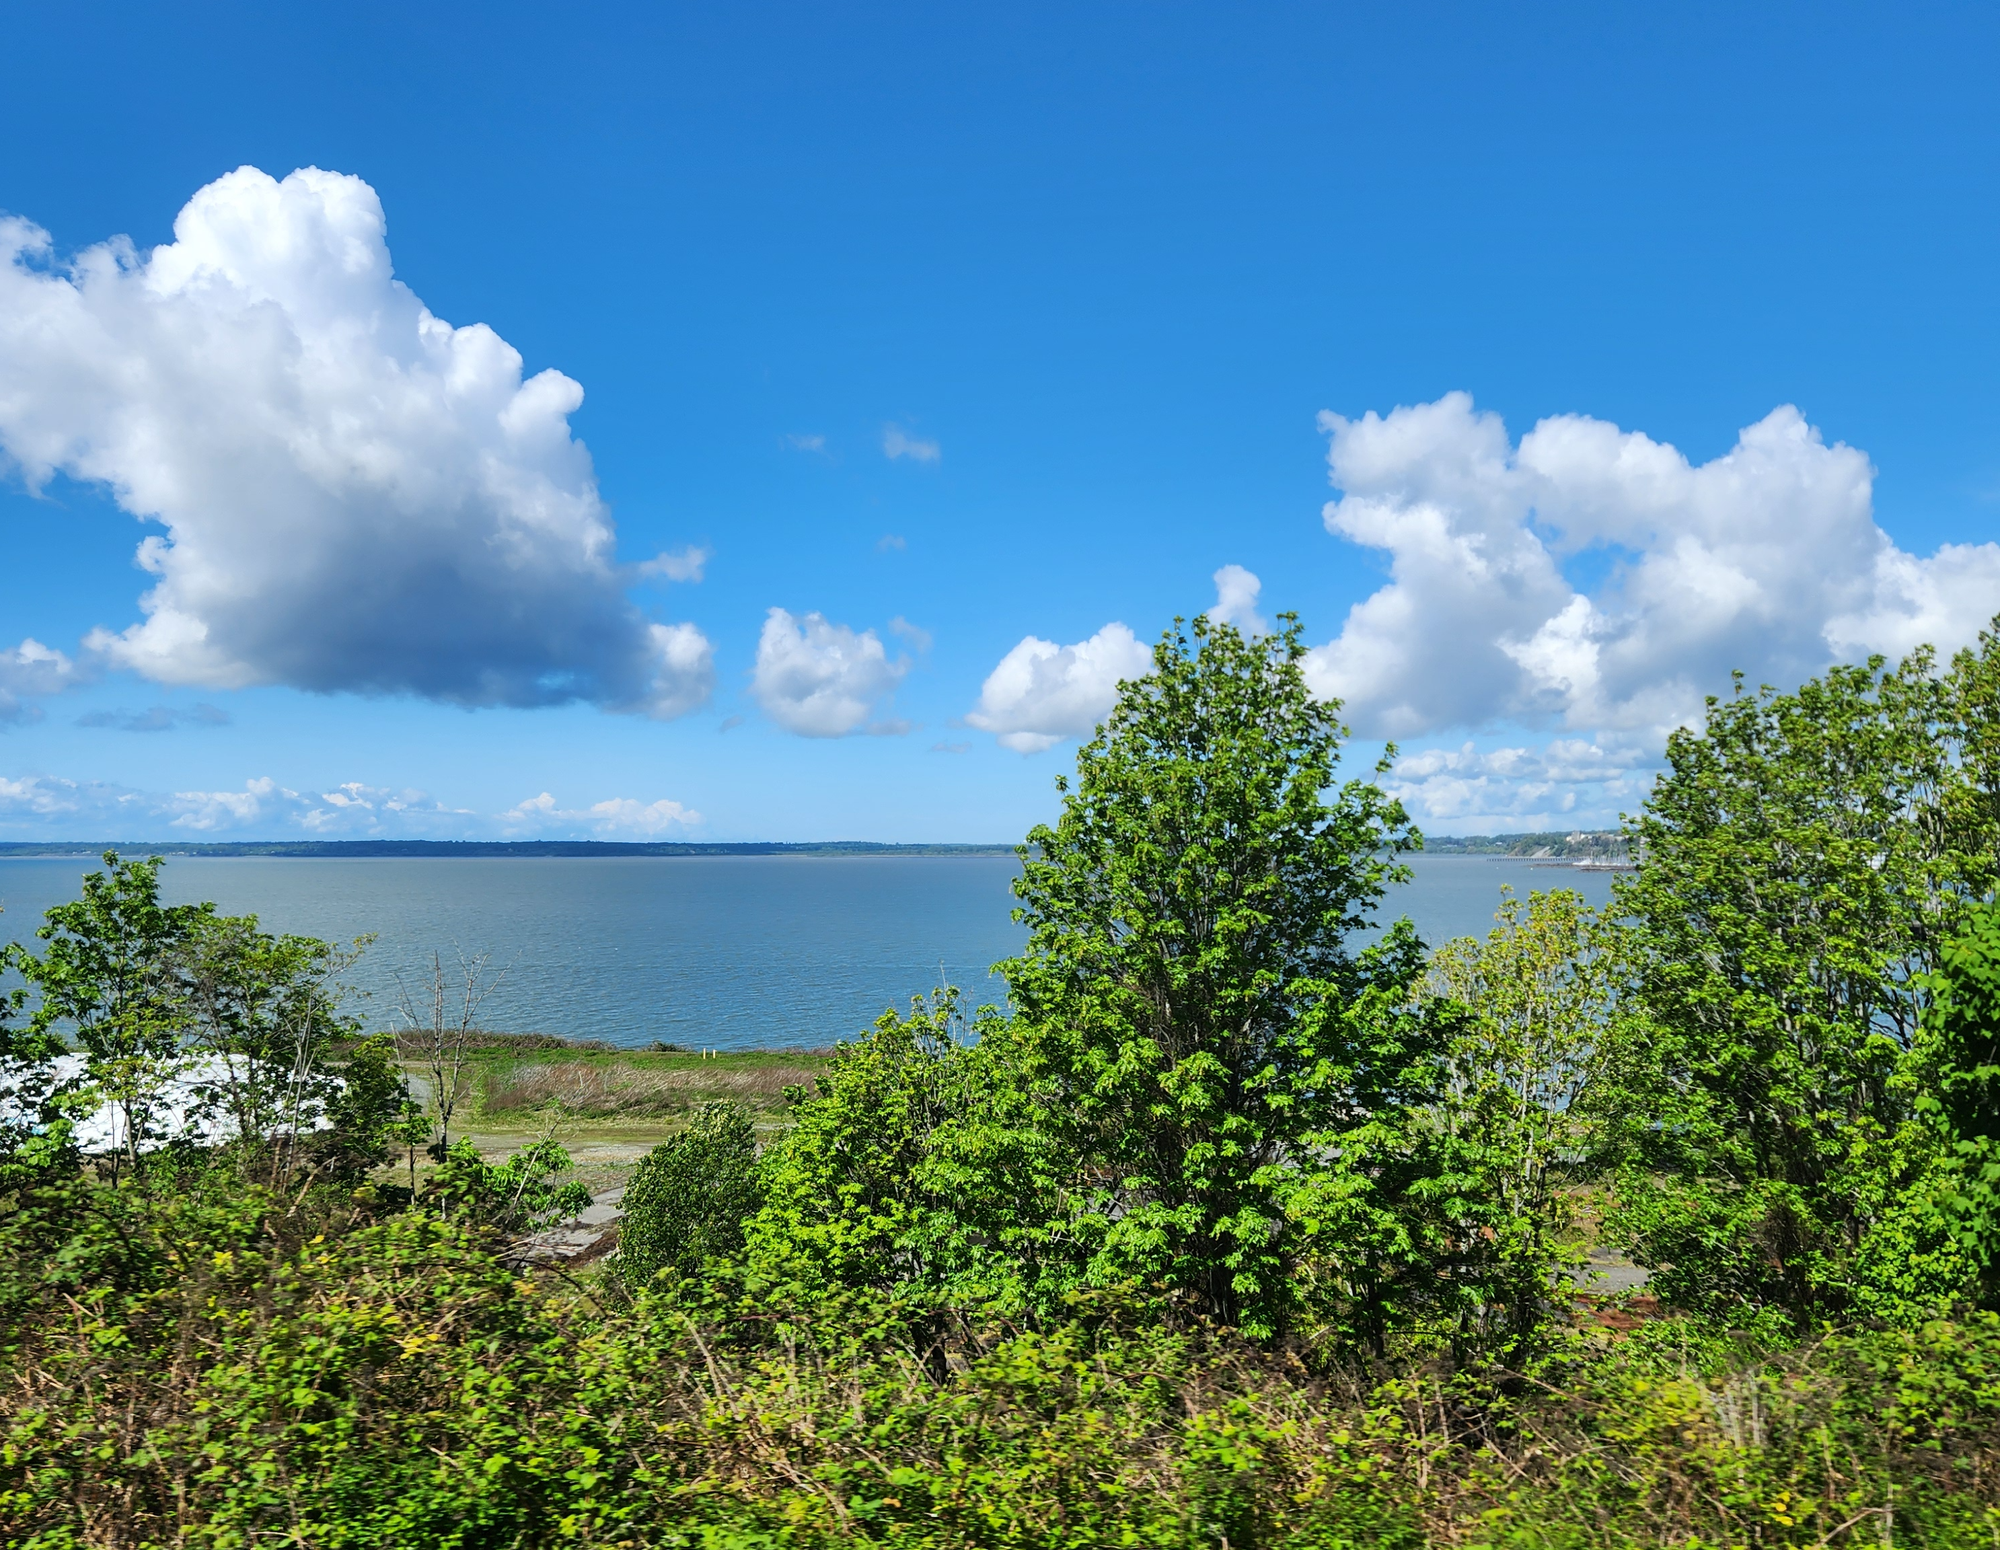 A view of Bellingham Bay with trees in the foreground and water the middle and partly sunny skies beyond.